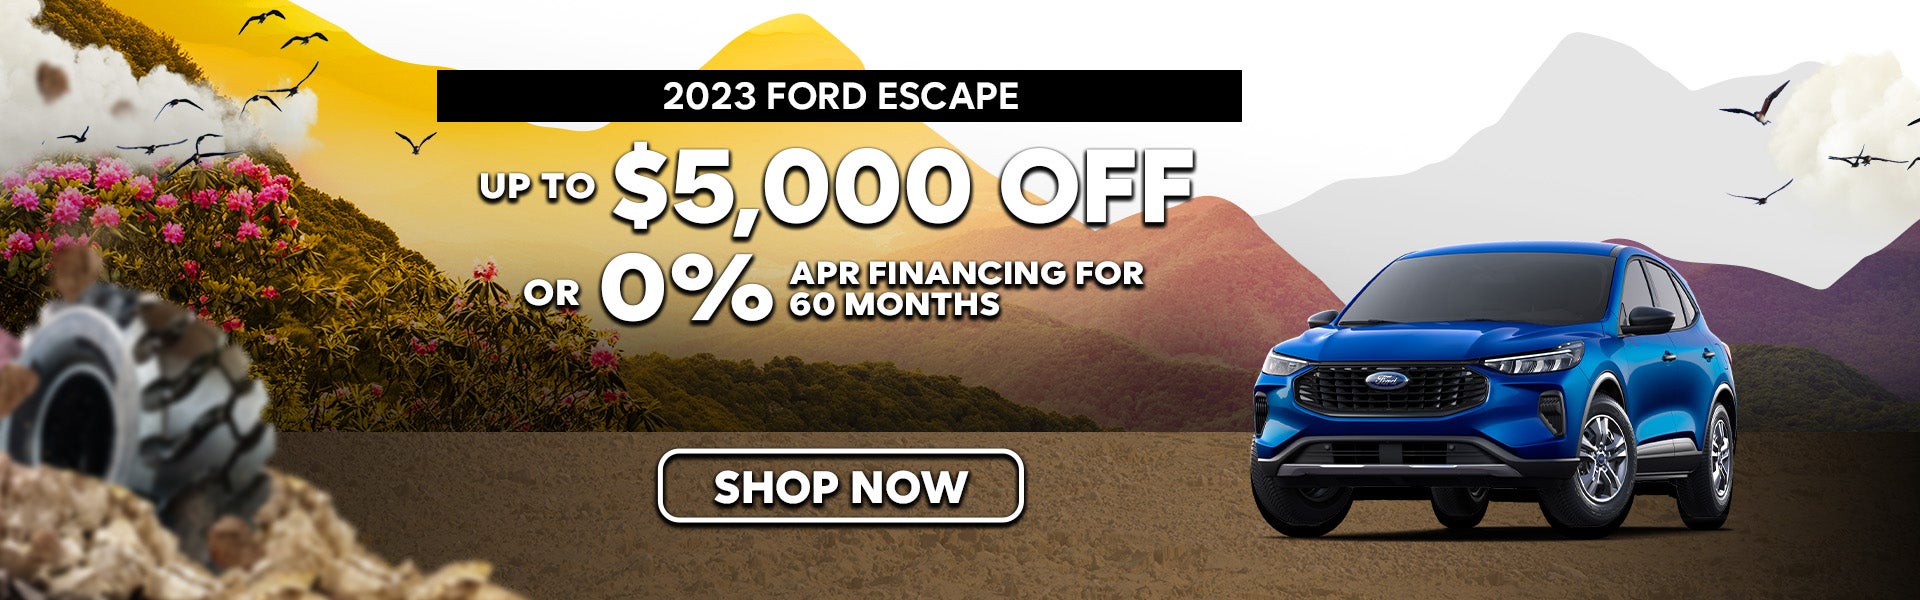 2023 Ford Escape Special Offer